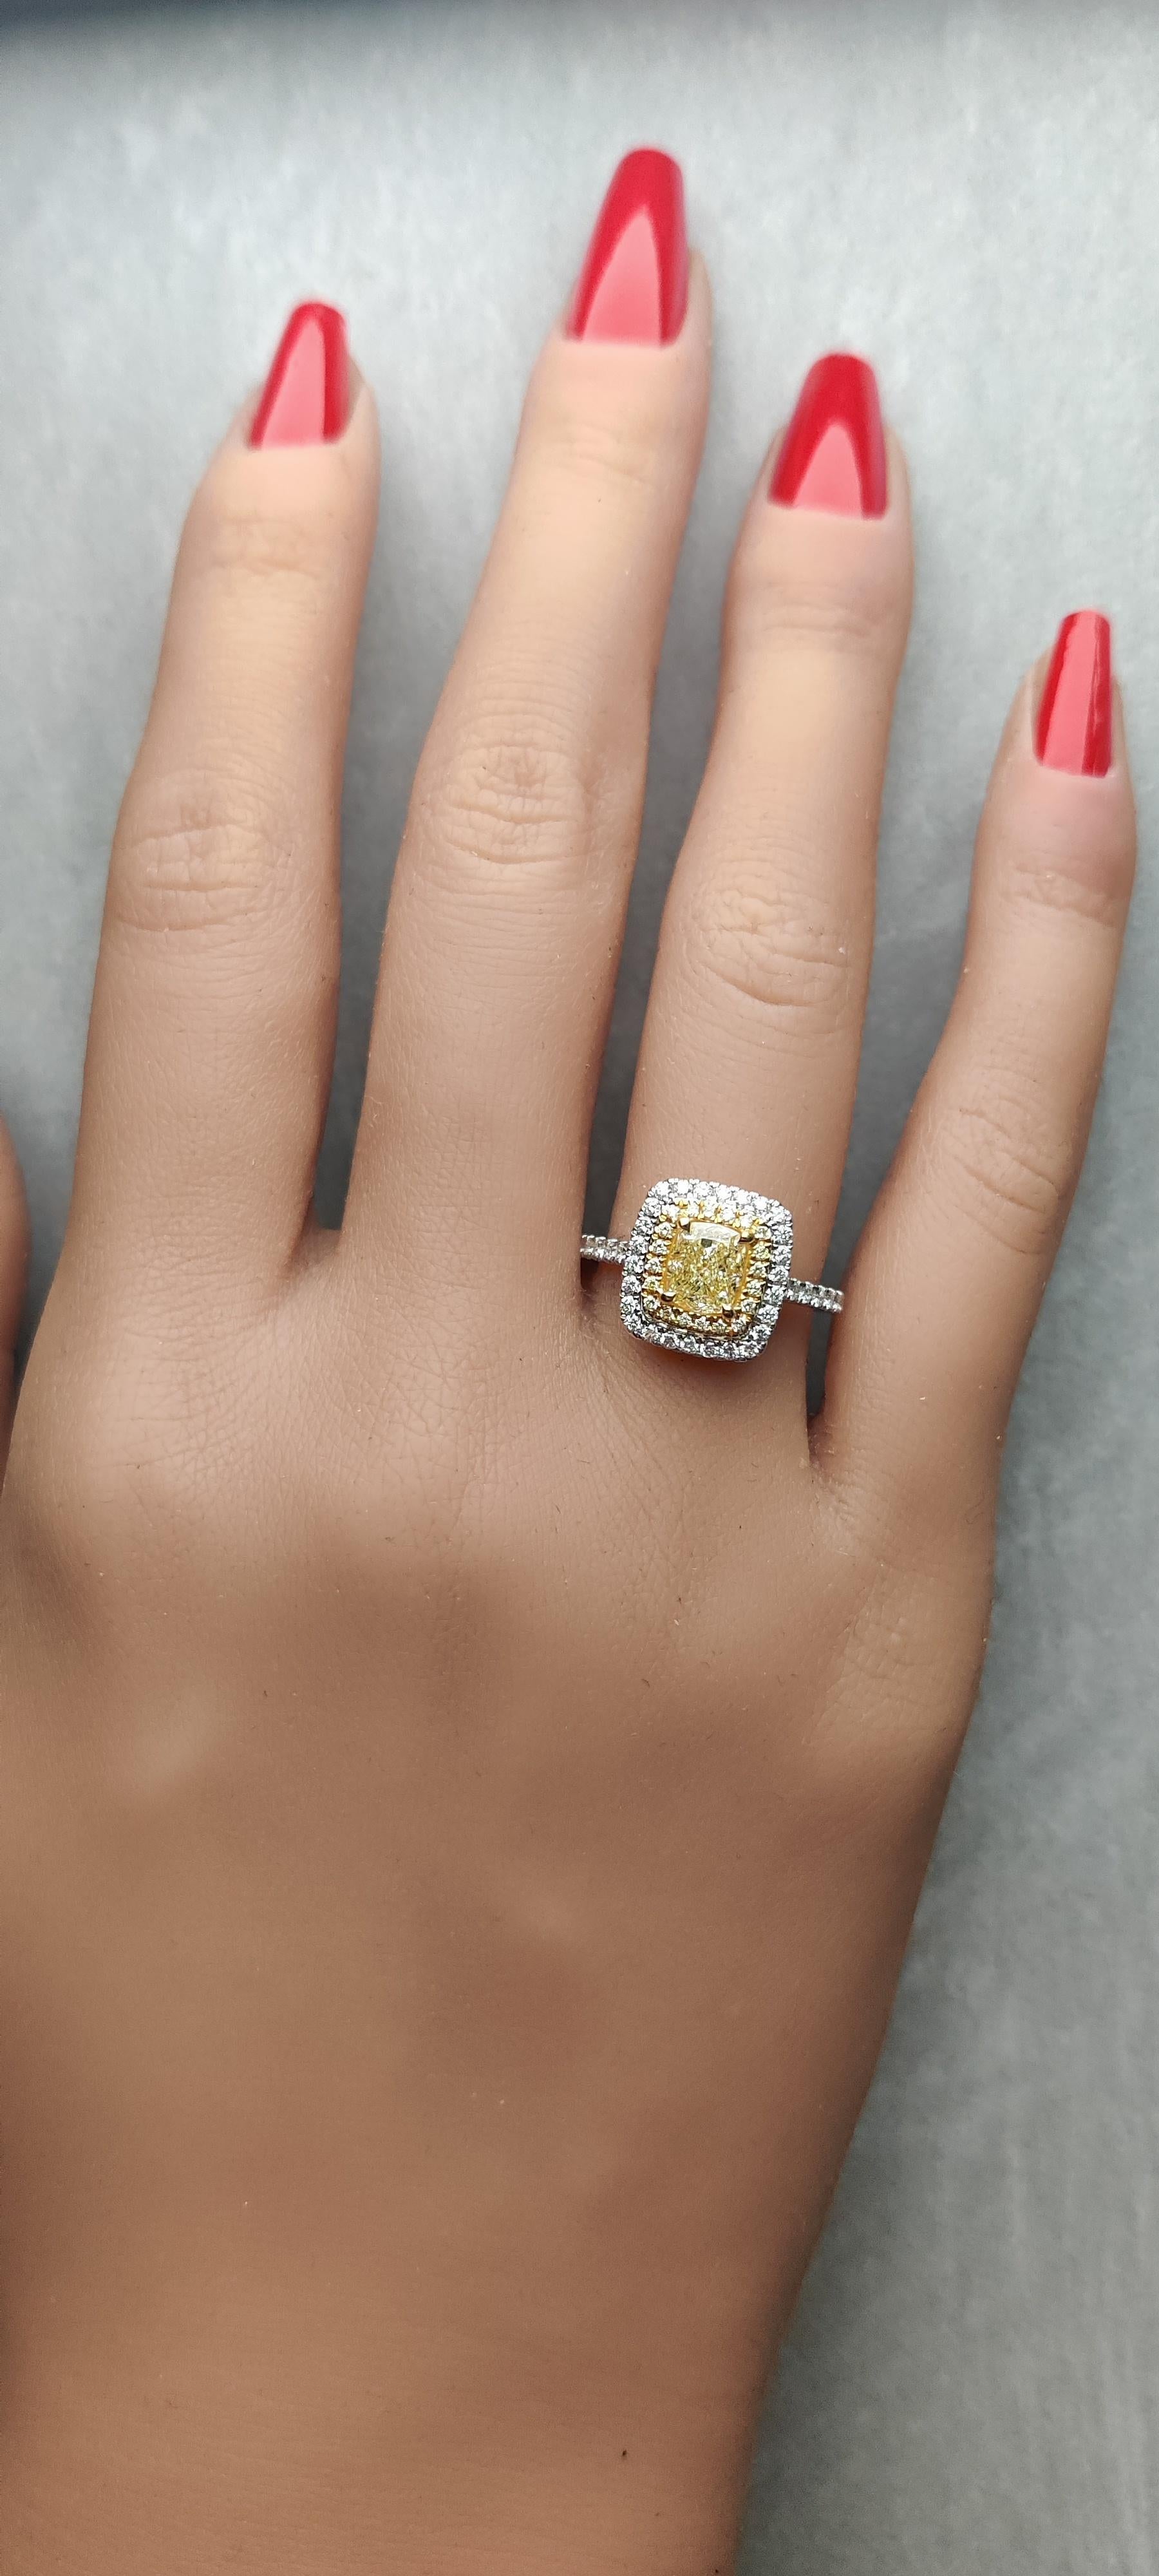 RareGemWorld's classic GIA certified diamond ring. Mounted in a beautiful 18K Yellow and White Gold setting with a natural cushion cut yellow diamond. The yellow diamond is surrounded by round natural yellow diamond melee and round natural white